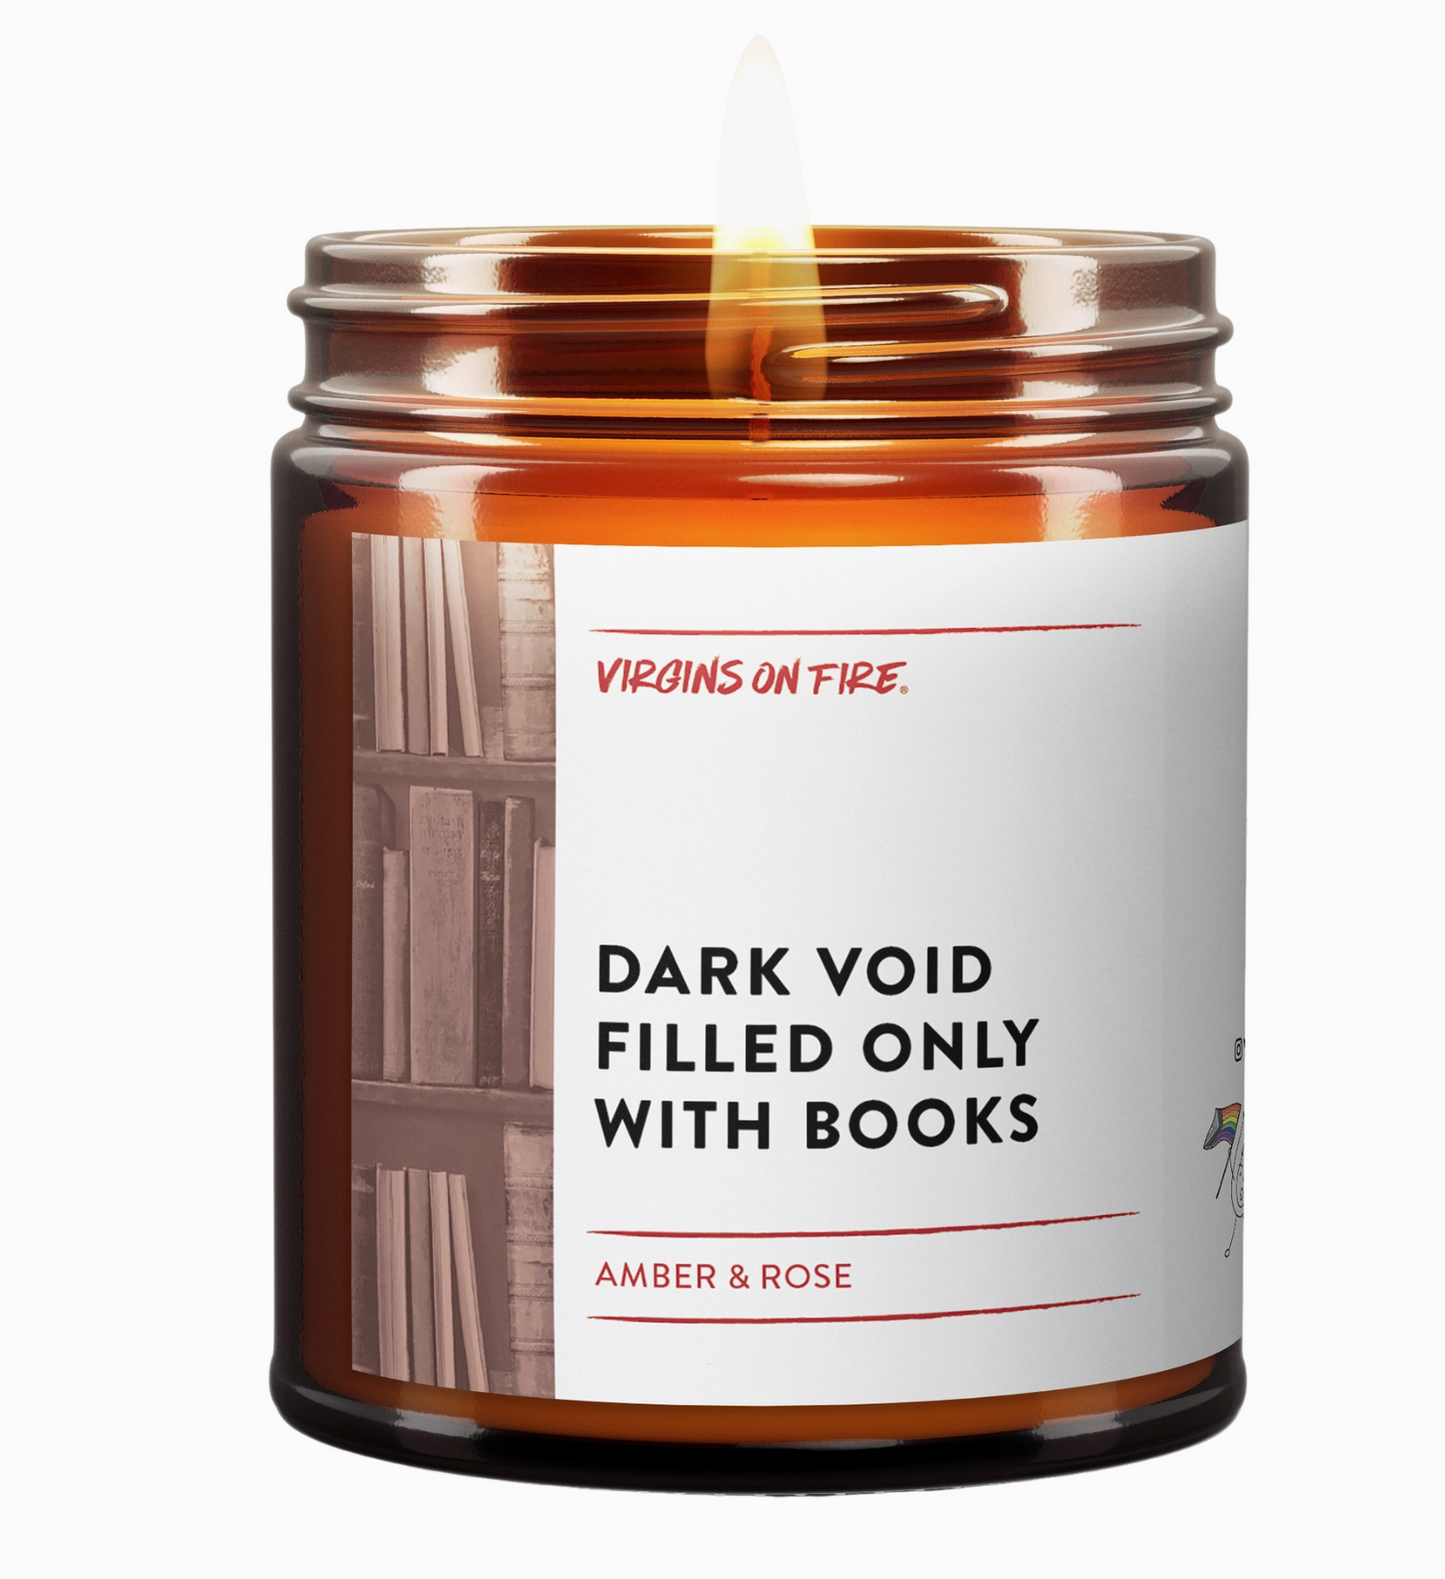 Dark Void Filled Only with Books Soy Candle